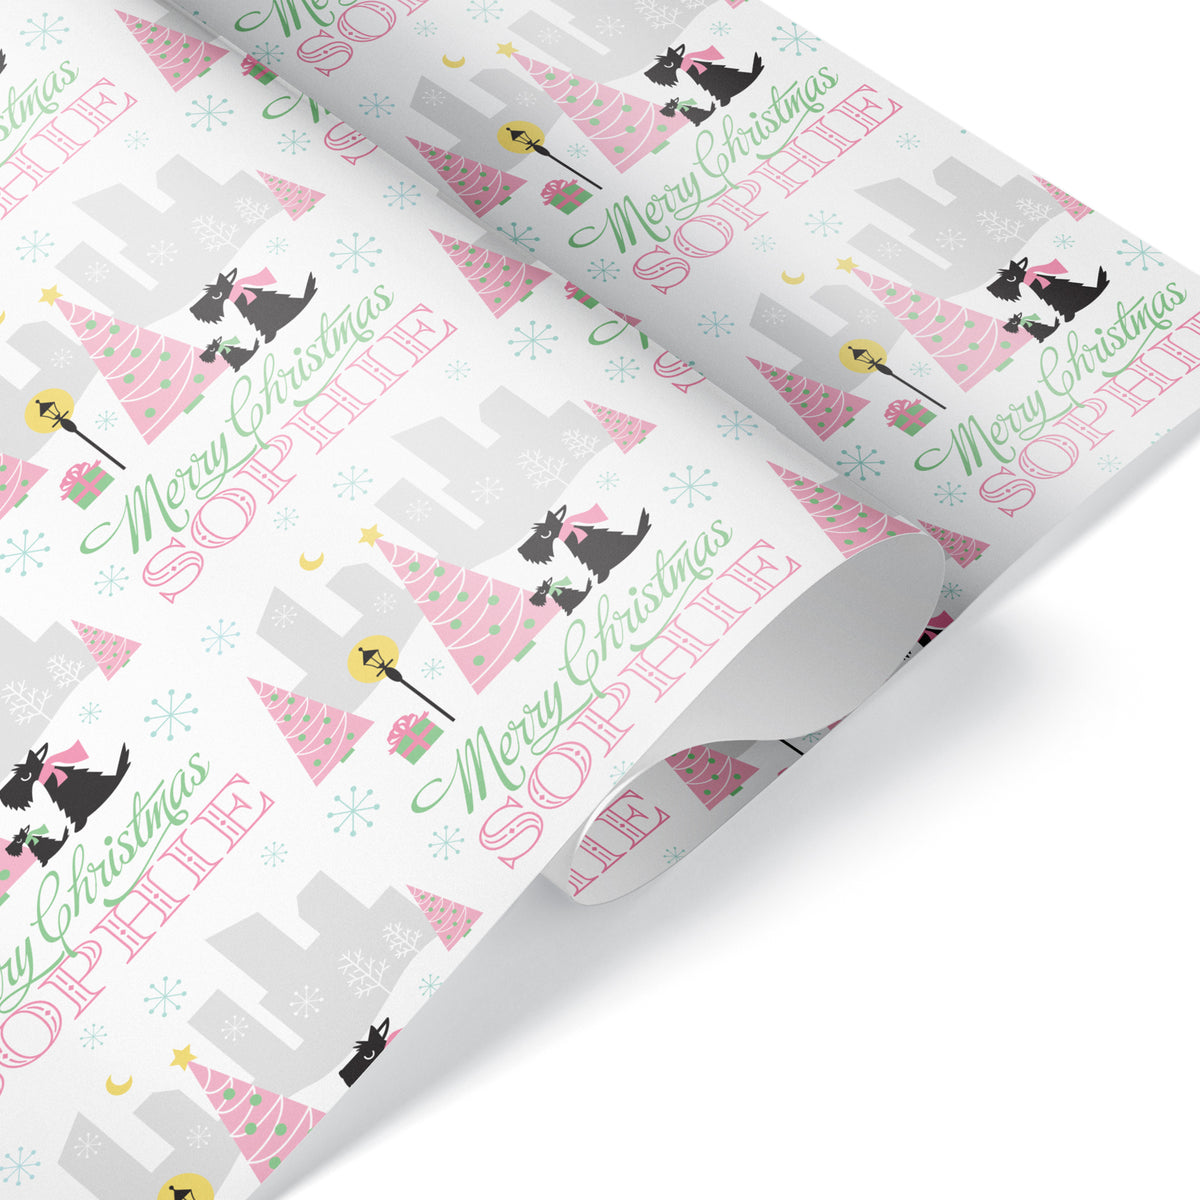 Scotties in the City Christmas Personalized Wrapping Paper - PINK